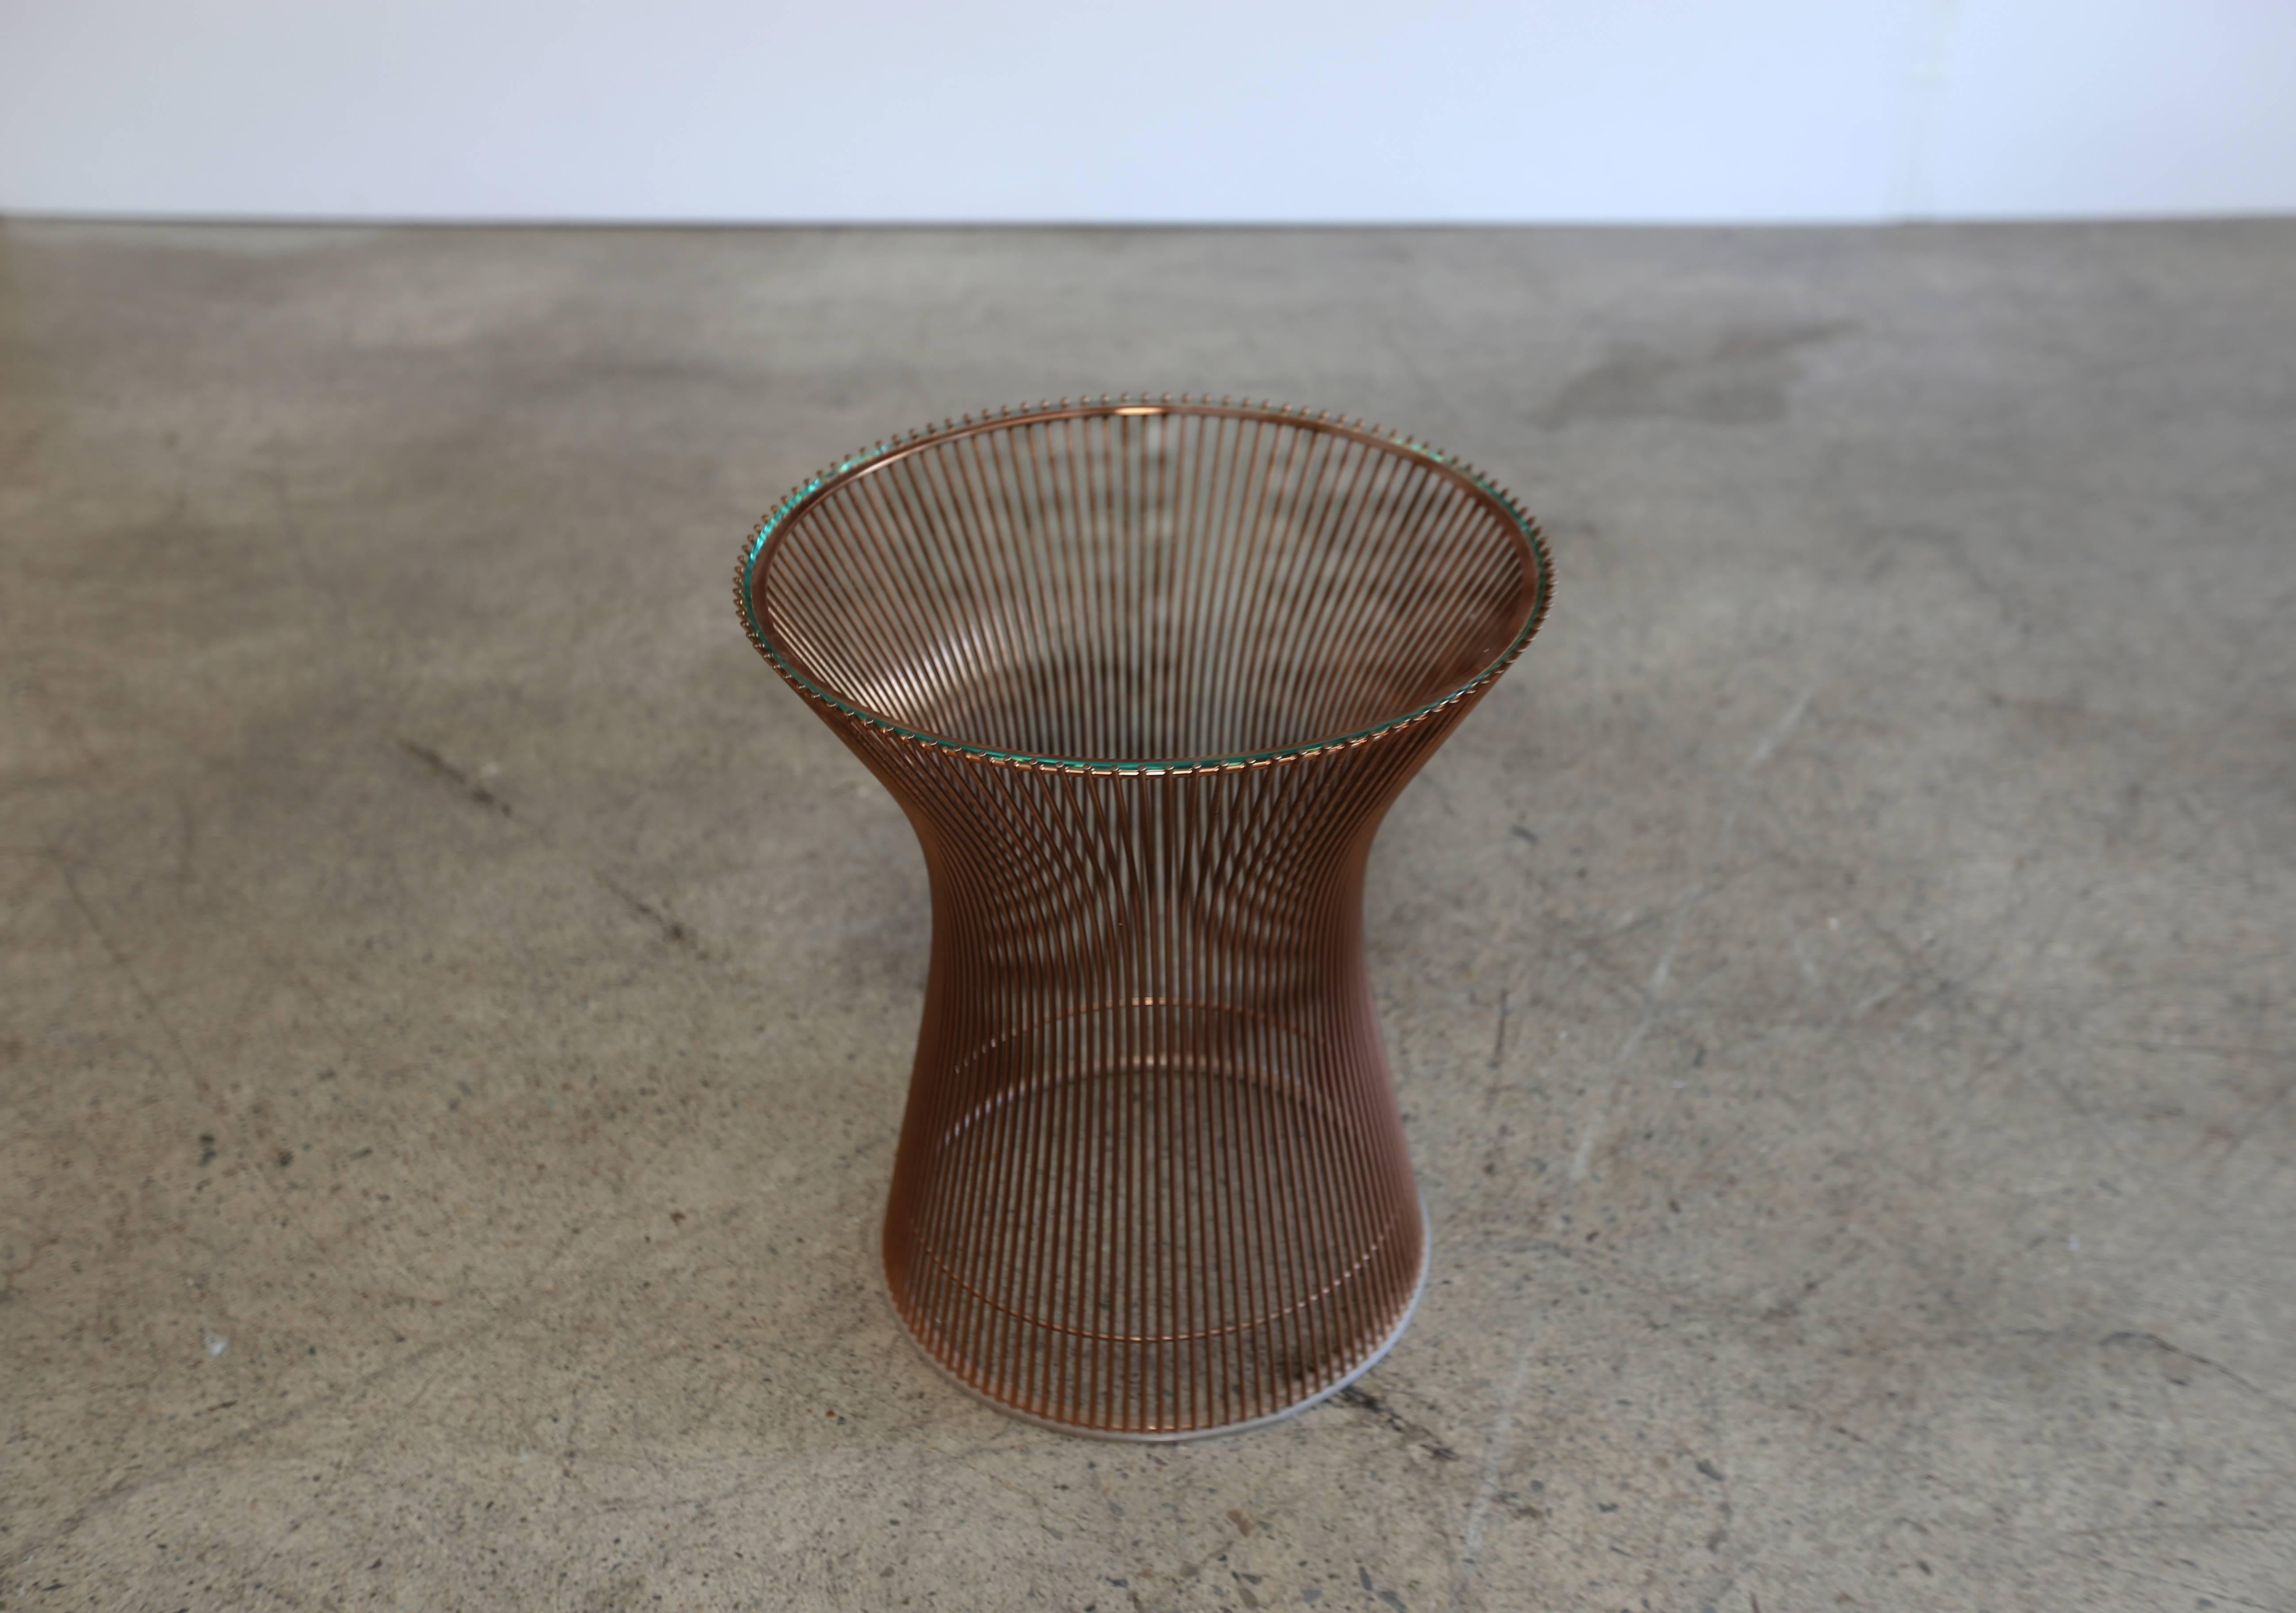 Rare copper occasional / side table by Warren Platner for Knoll.